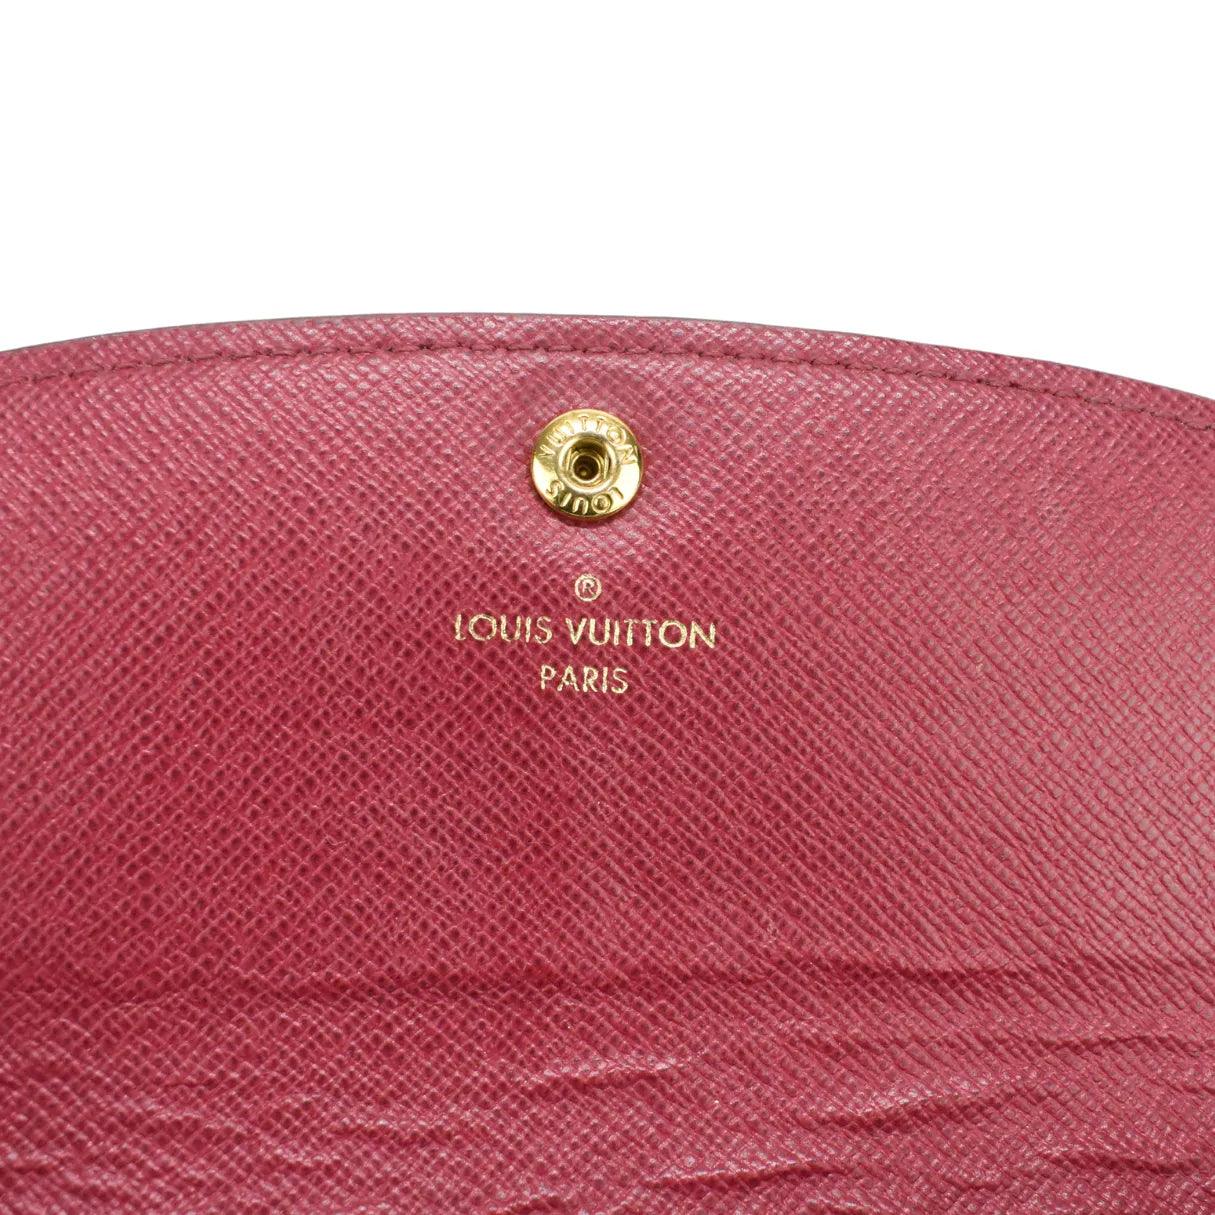 Louis Vuitton Snap Wallet - Fashionably Yours